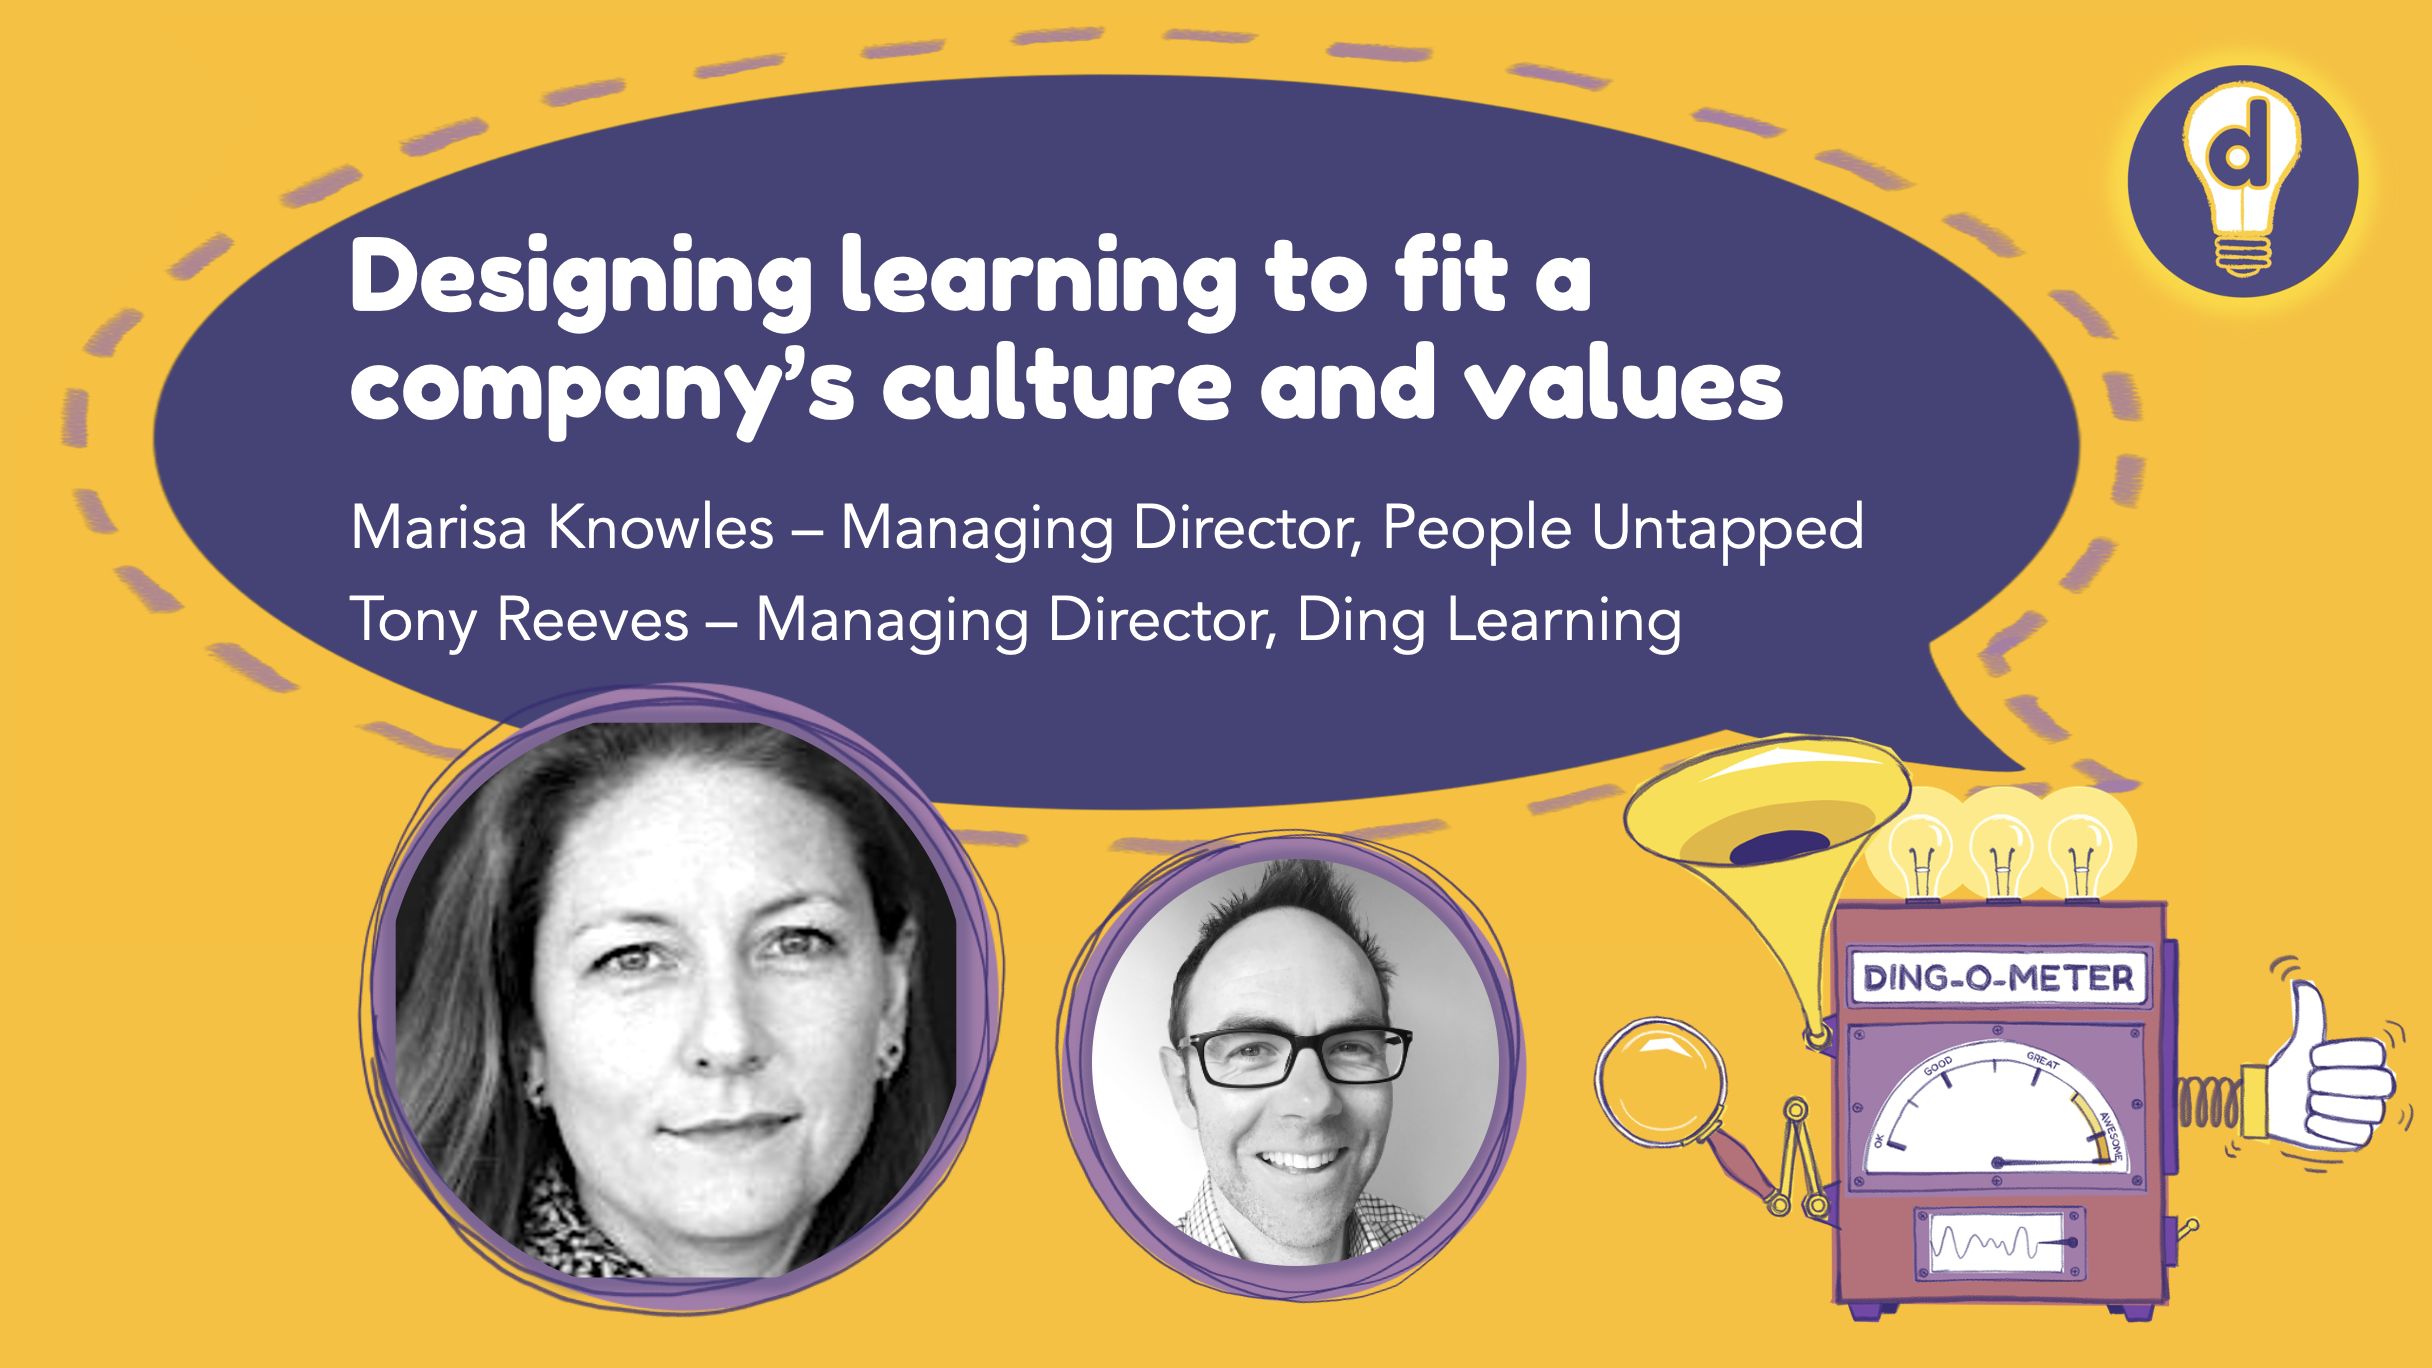 Designing learning to fit a company's culture and values